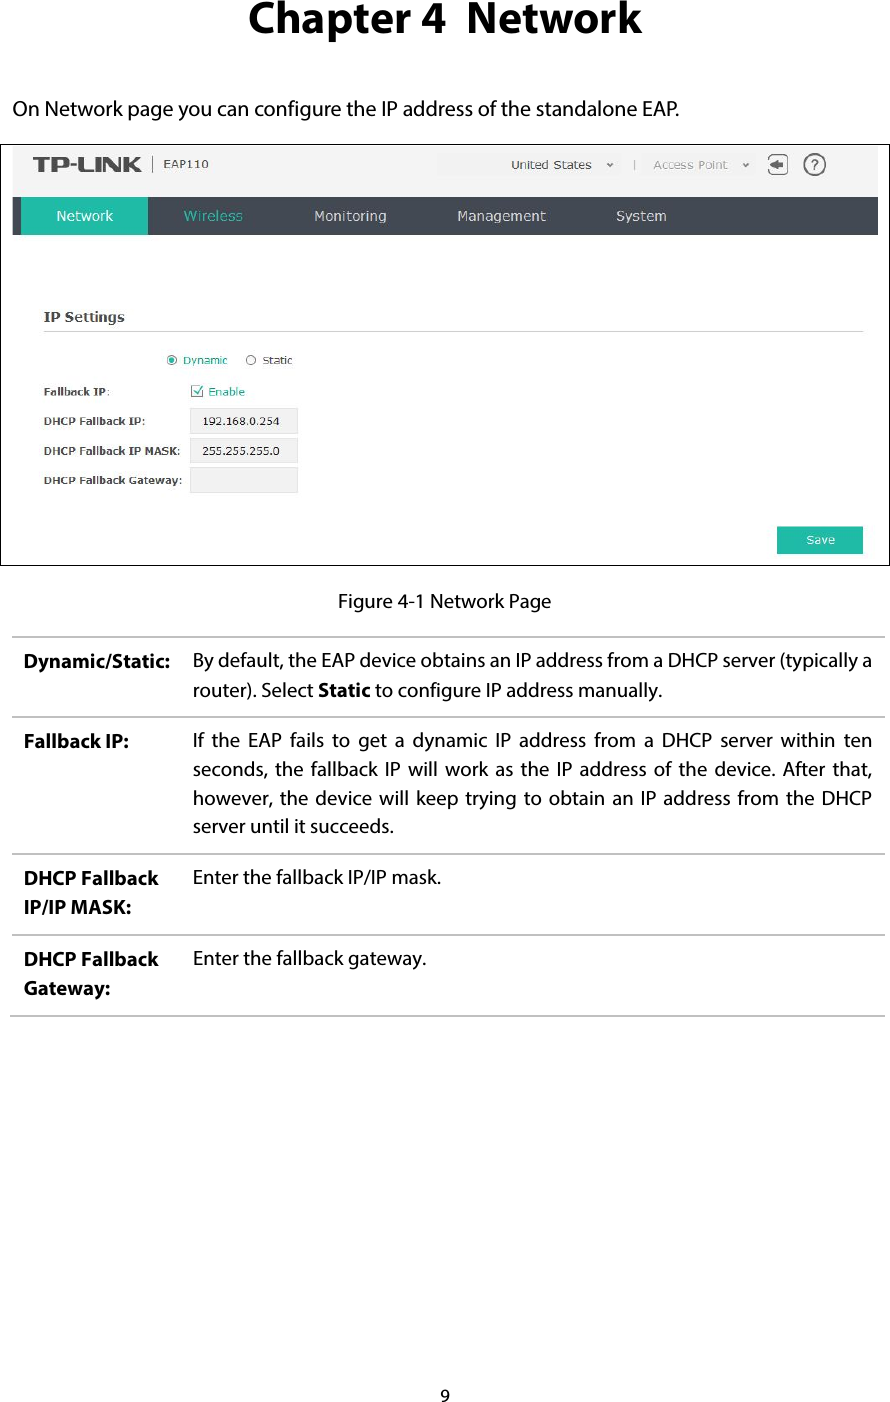 9  Chapter 4  Network On Network page you can configure the IP address of the standalone EAP.    Figure 4-1 Network Page Dynamic/Static: By default, the EAP device obtains an IP address from a DHCP server (typically a router). Select Static to configure IP address manually. Fallback IP: If the EAP fails to get a dynamic IP address from a DHCP server within ten seconds, the fallback IP will work as the IP address of the device. After that, however, the device will keep trying to obtain an IP address from the DHCP server until it succeeds. DHCP Fallback IP/IP MASK: Enter the fallback IP/IP mask. DHCP Fallback Gateway: Enter the fallback gateway.     